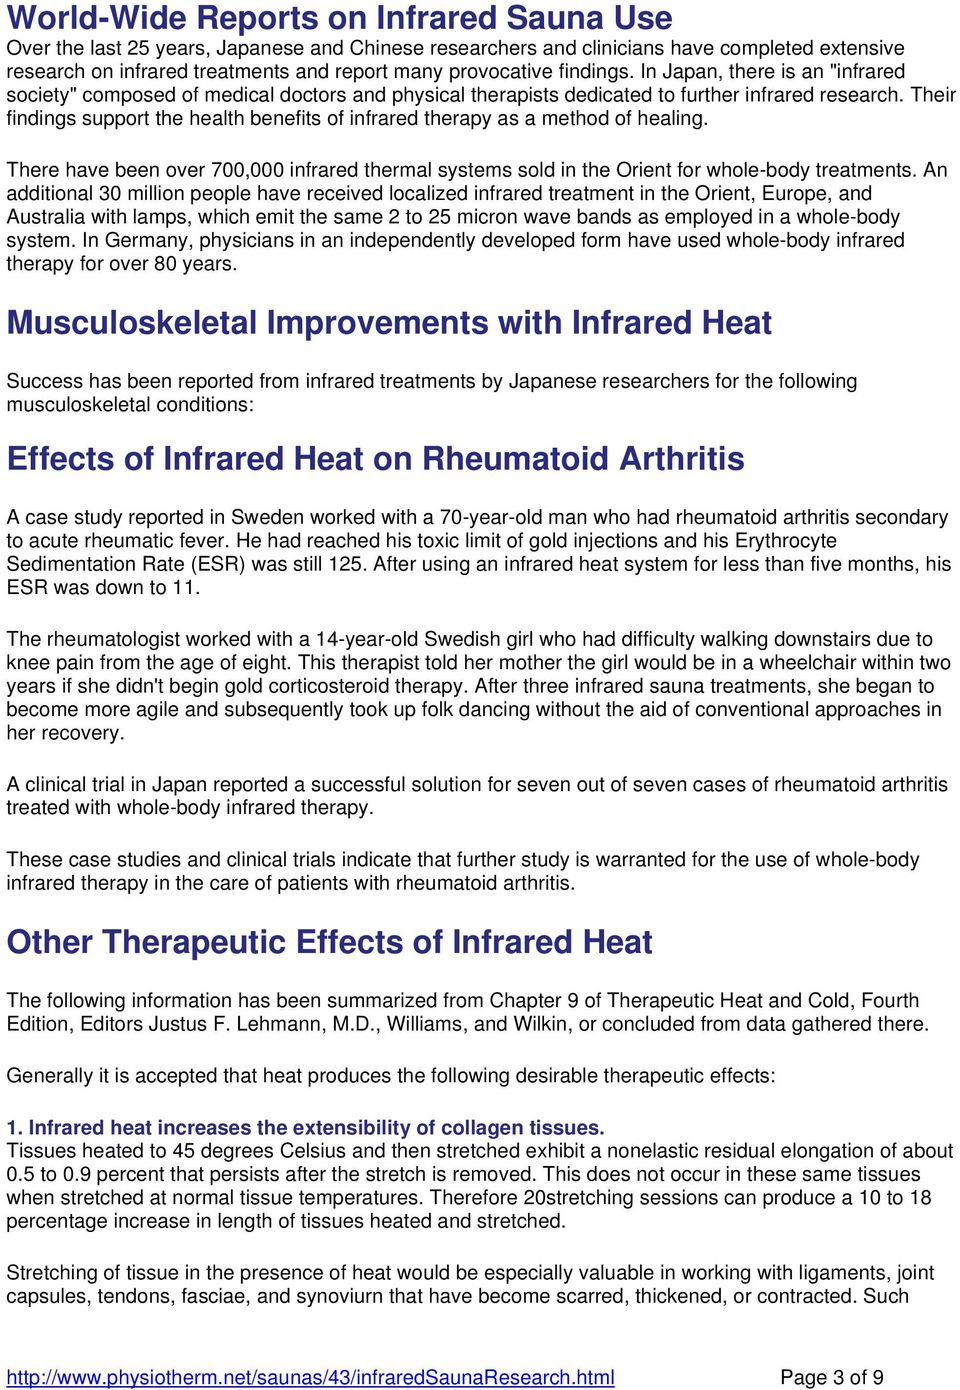 Their findings support the health benefits of infrared therapy as a method of healing. There have been over 700,000 infrared thermal systems sold in the Orient for whole-body treatments.